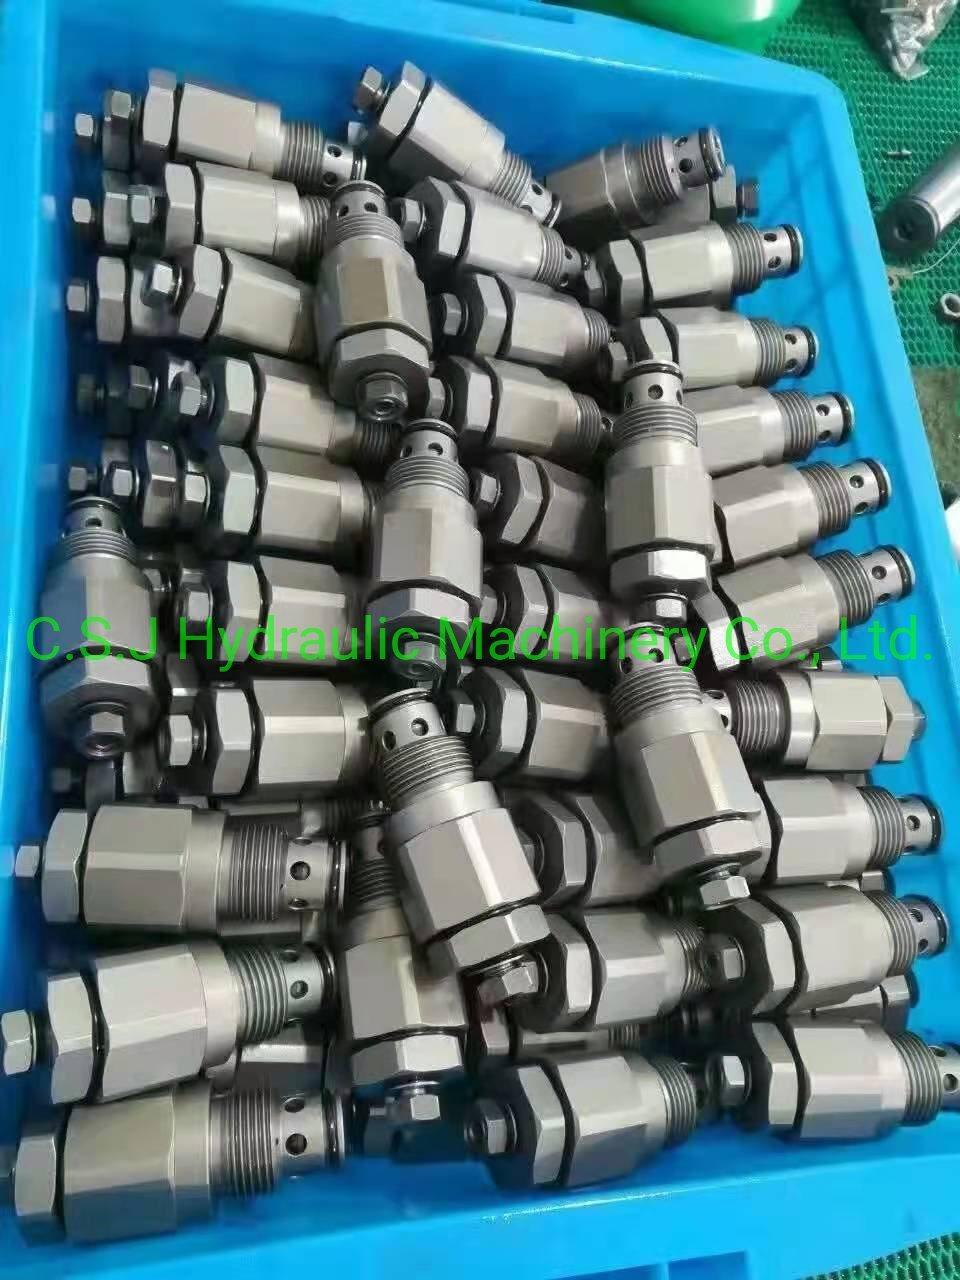 Dh300-7 Dh420 Dh500 Main Valve and Relief Valve Rotary Valve